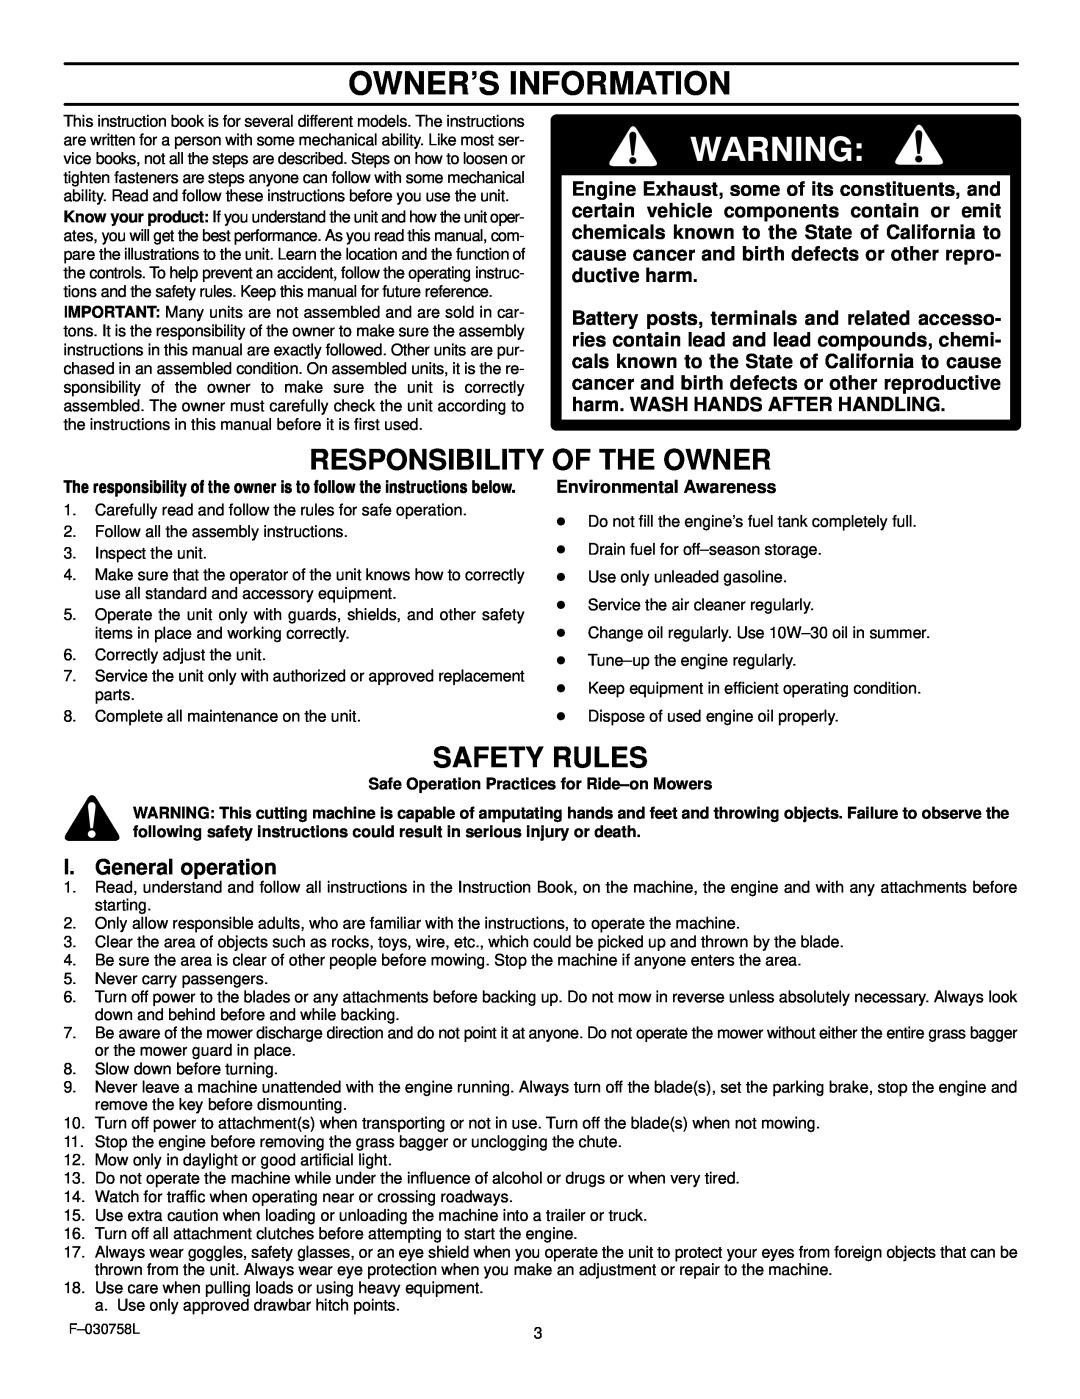 Murray 465609x24A manual Owner’S Information, Responsibility Of The Owner, Safety Rules, I. General operation 